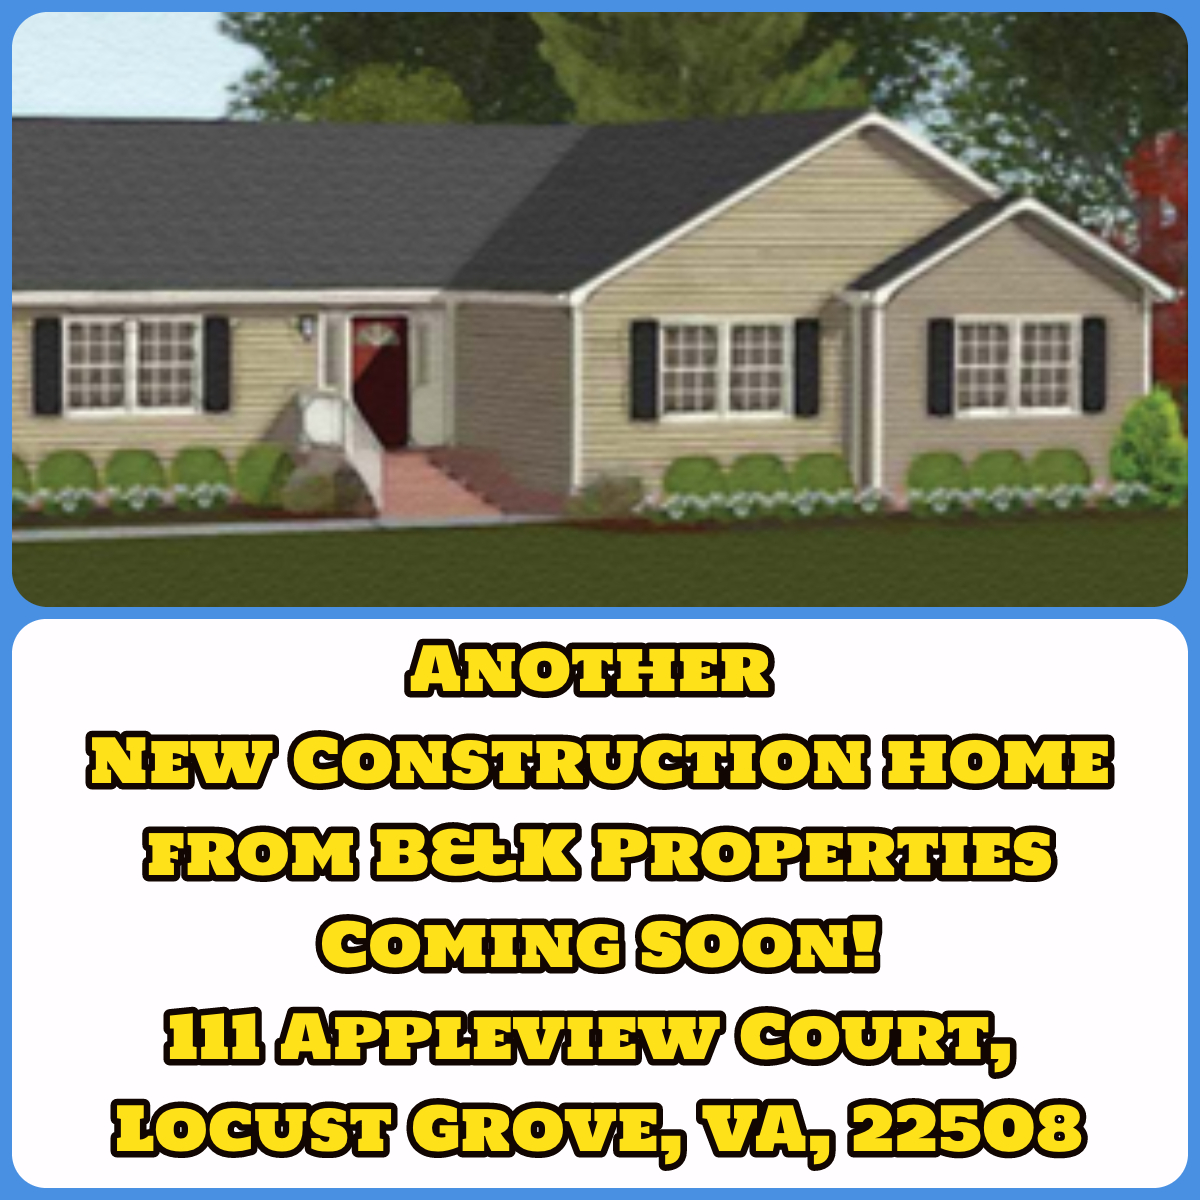 We are very excited to tell you that we have another #newconstruction home coming to the #LakeOfTheWoods area soon, at 111 Appleview Court, #LocustGrove, VA, 22508. 
This home will have 3bedrooms, 2full bathrooms, 1844 sq ft and an attached double garage. Stay tuned for updates!